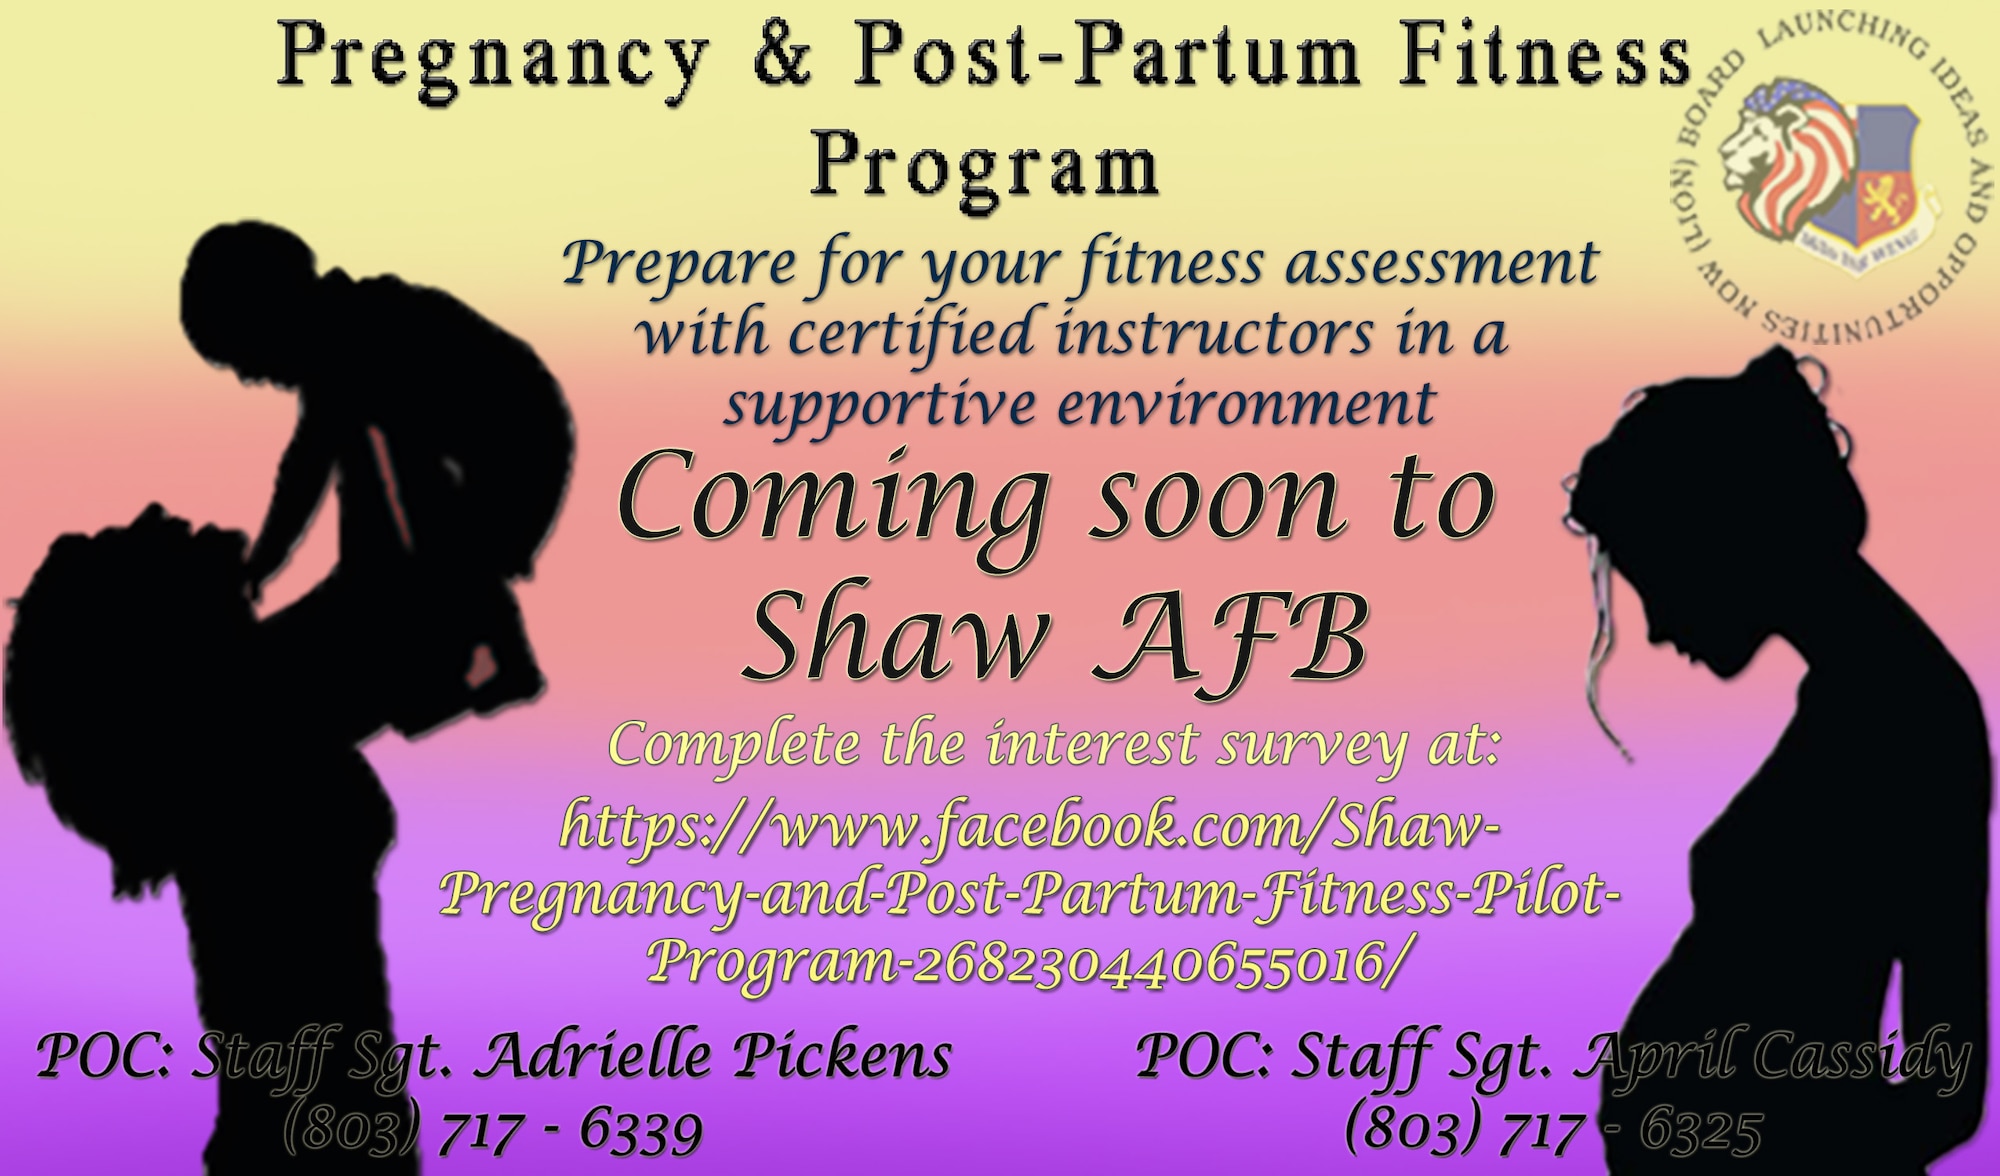 U.S. Air Force Staff Sgt. Adrielle Pickens, 51st Intelligence Squadron (IS) unit training and deployment manager, and Staff Sgt. April Cassidy, 51st IS executive officer, devised the Pregnancy & Post-Partum Fitness Program to assist women who are either pregnant or within the first 12 months of post-partum with staying fit to fight or preparing for their first fitness assessment after giving birth.